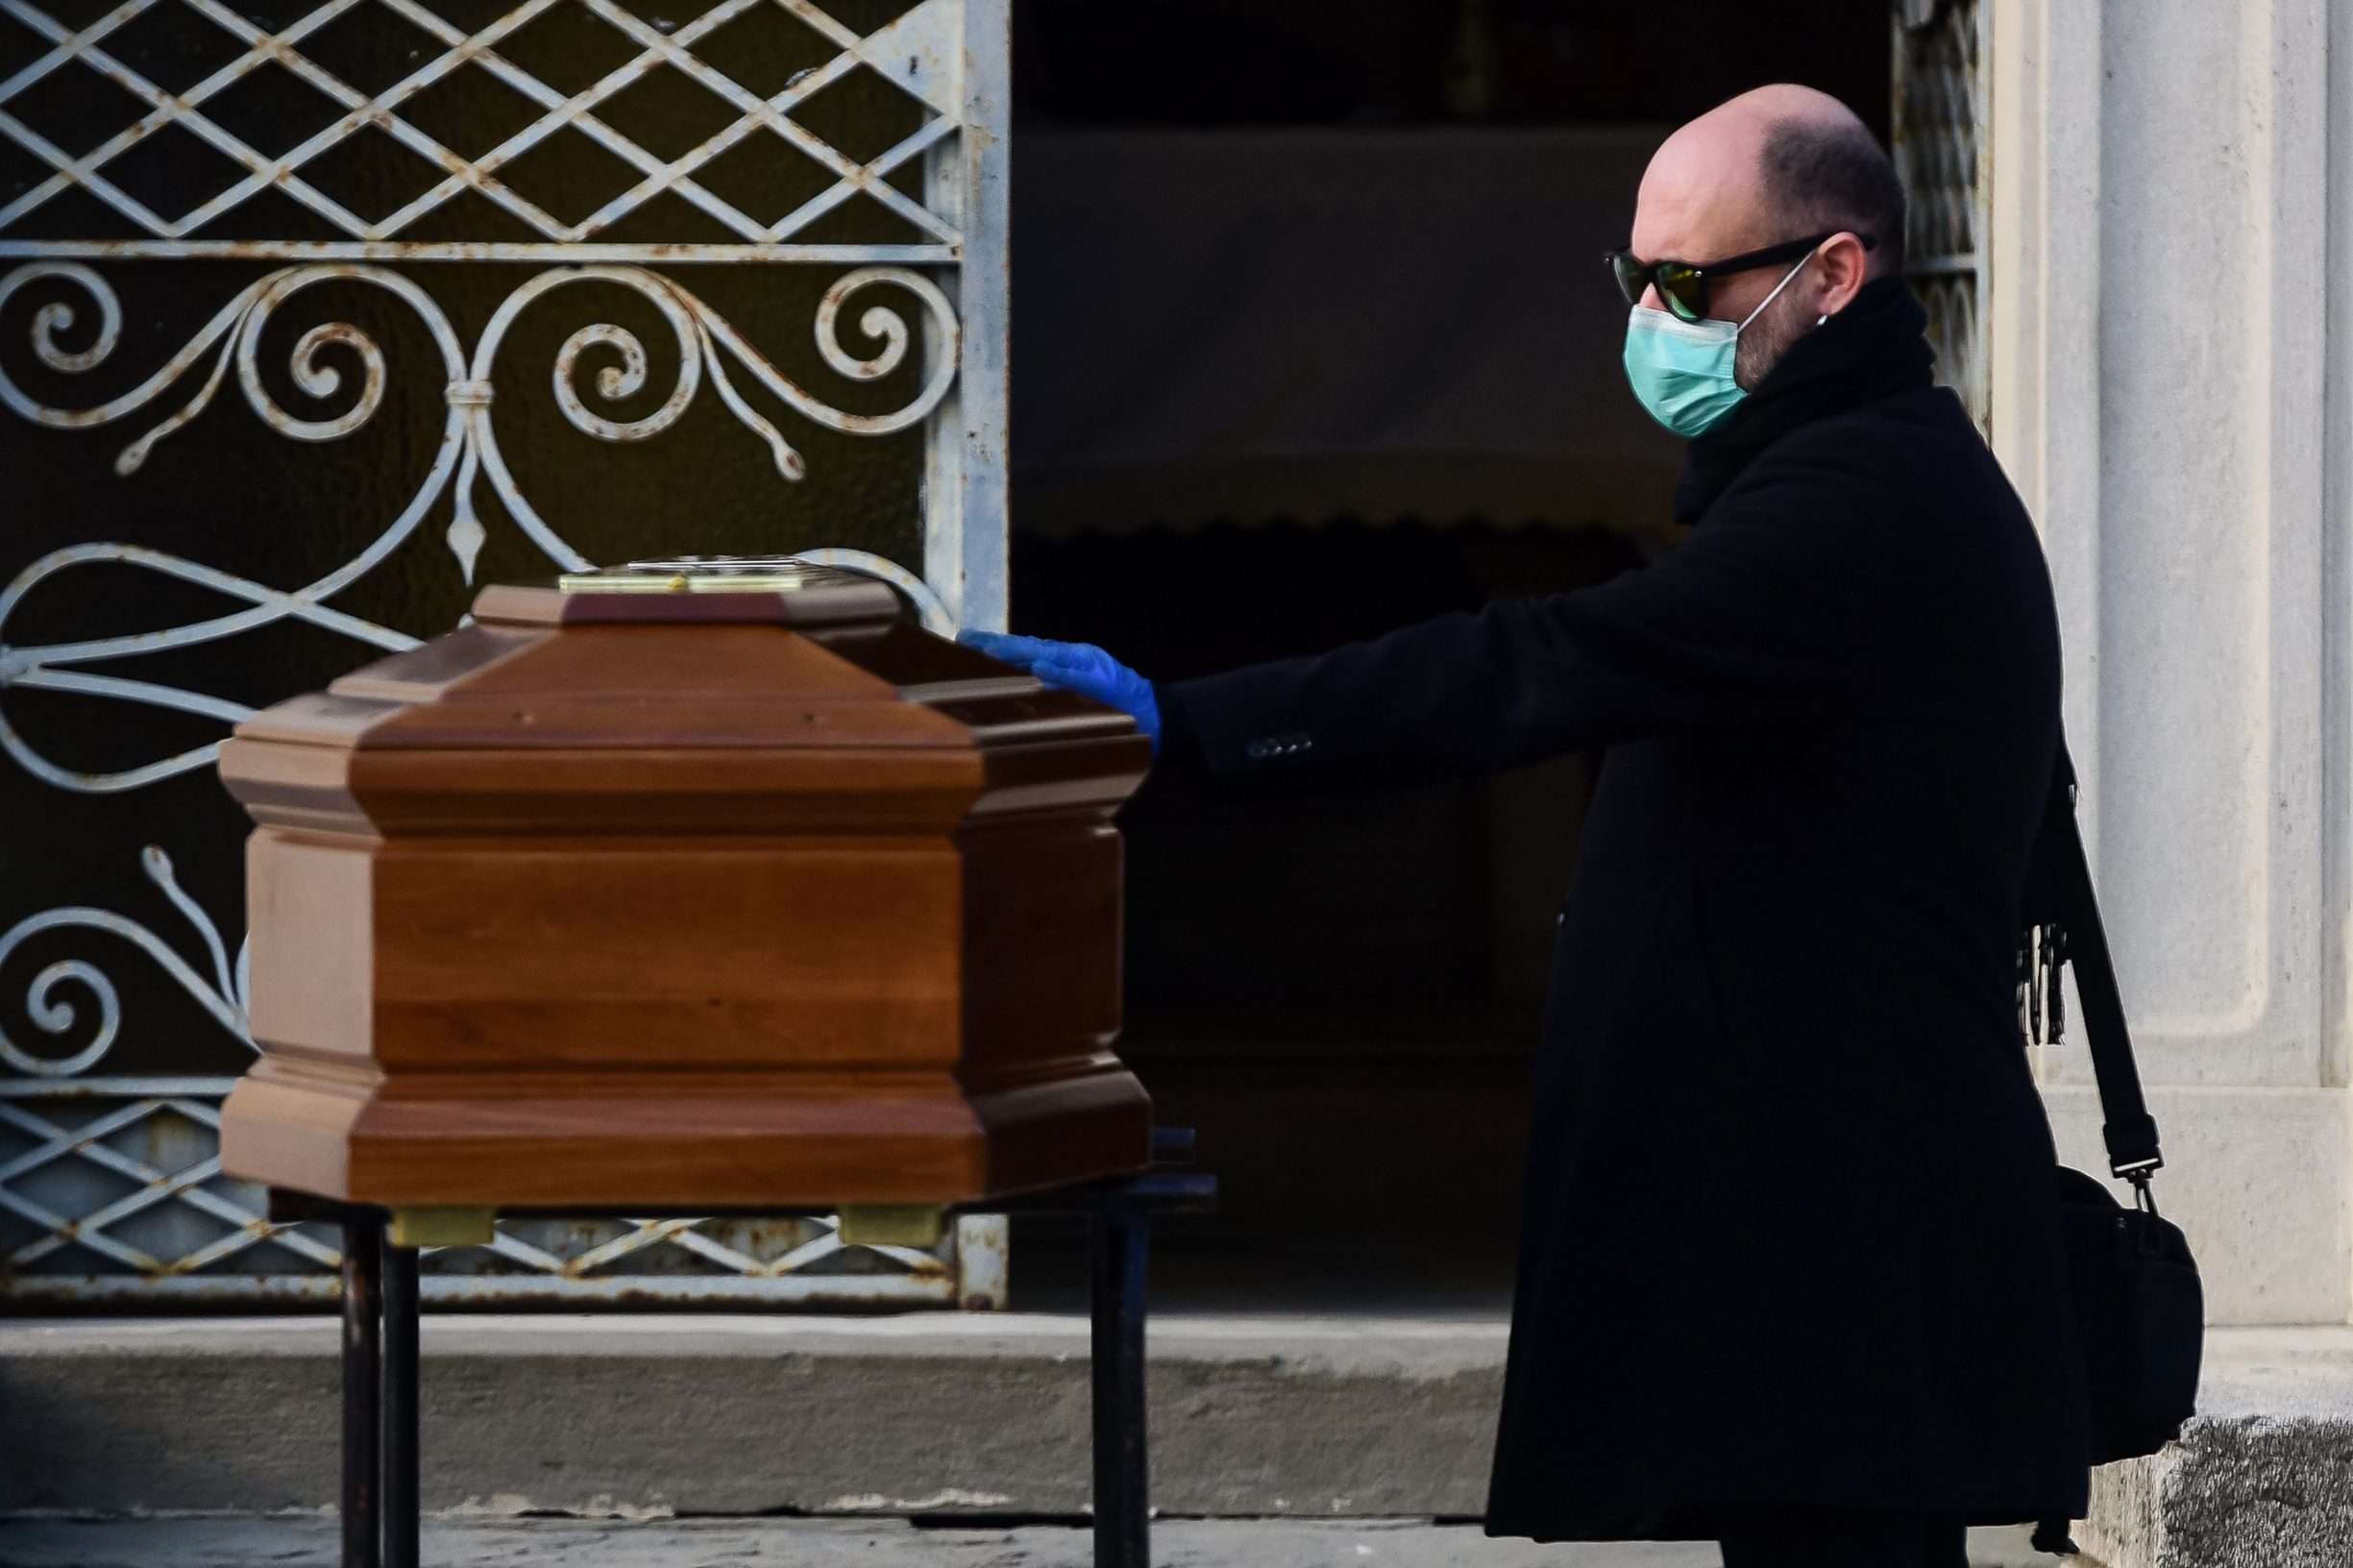 A man touches the coffin of his mother during a funeral service in the closed cemetery of Seriate, near Bergamo, Lombardy, on March 20, 2020 during the country's lockdown aimed at stopping the spread of the COVID-19 (new coronavirus) pandemic. (Photo by Piero Cruciatti / AFP)